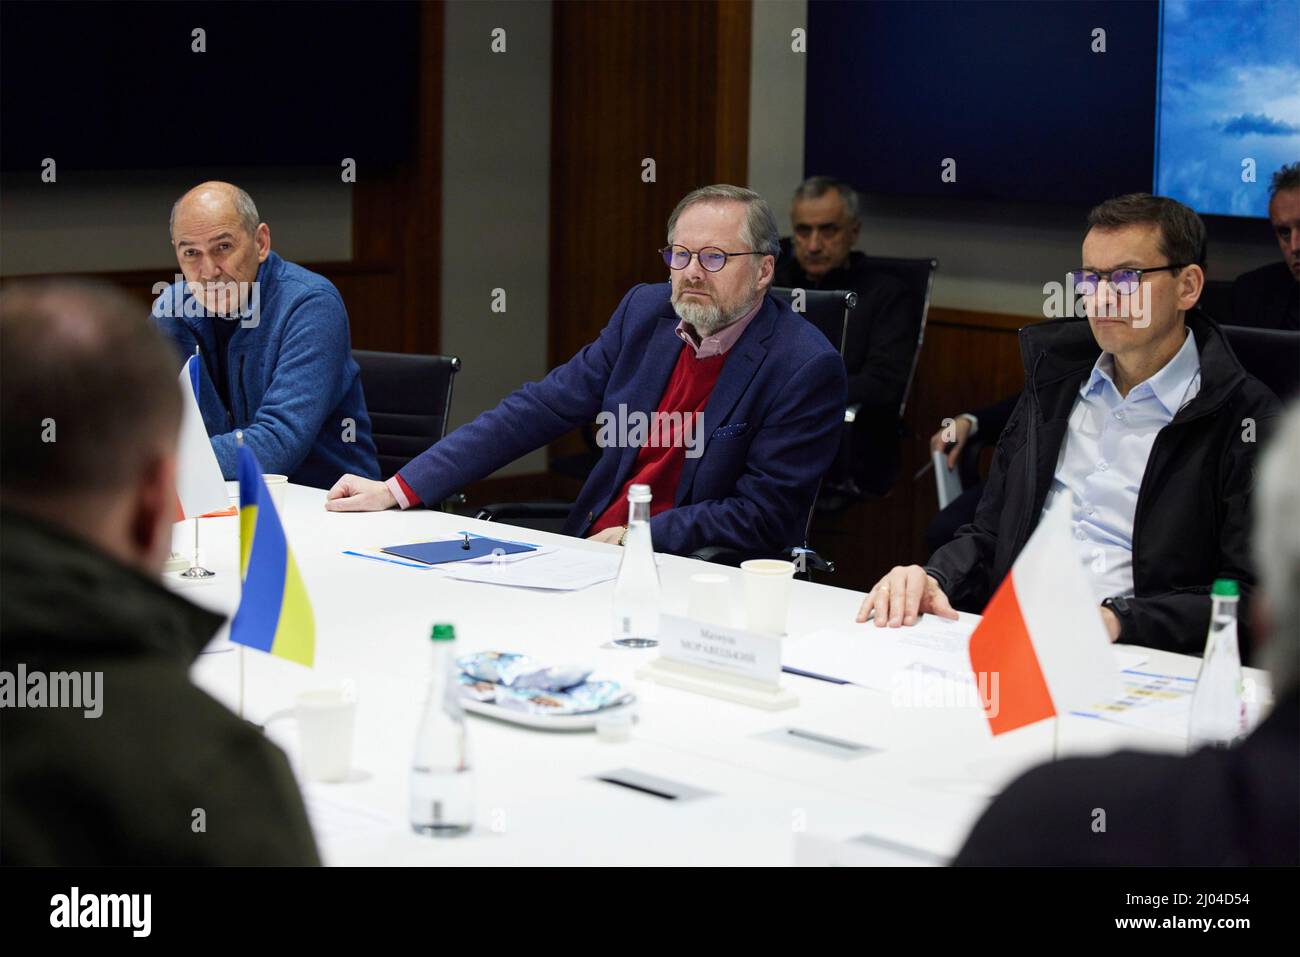 Kyiv, Ukraine. 15th Mar, 2022. Slovenian Prime Minister Janez Jansa, left, Czech Prime Minister Petr Fiala, center, and Polish Prime Minister Mateusz Morawiecki listen during a face-to-face meeting with Ukrainian President Volodymyr Zelenskyy, at a secure location March 15, 2022 in Kyiv, Ukraine. Credit: Ukraine Presidency/Ukraine Presidency/Alamy Live News Stock Photo